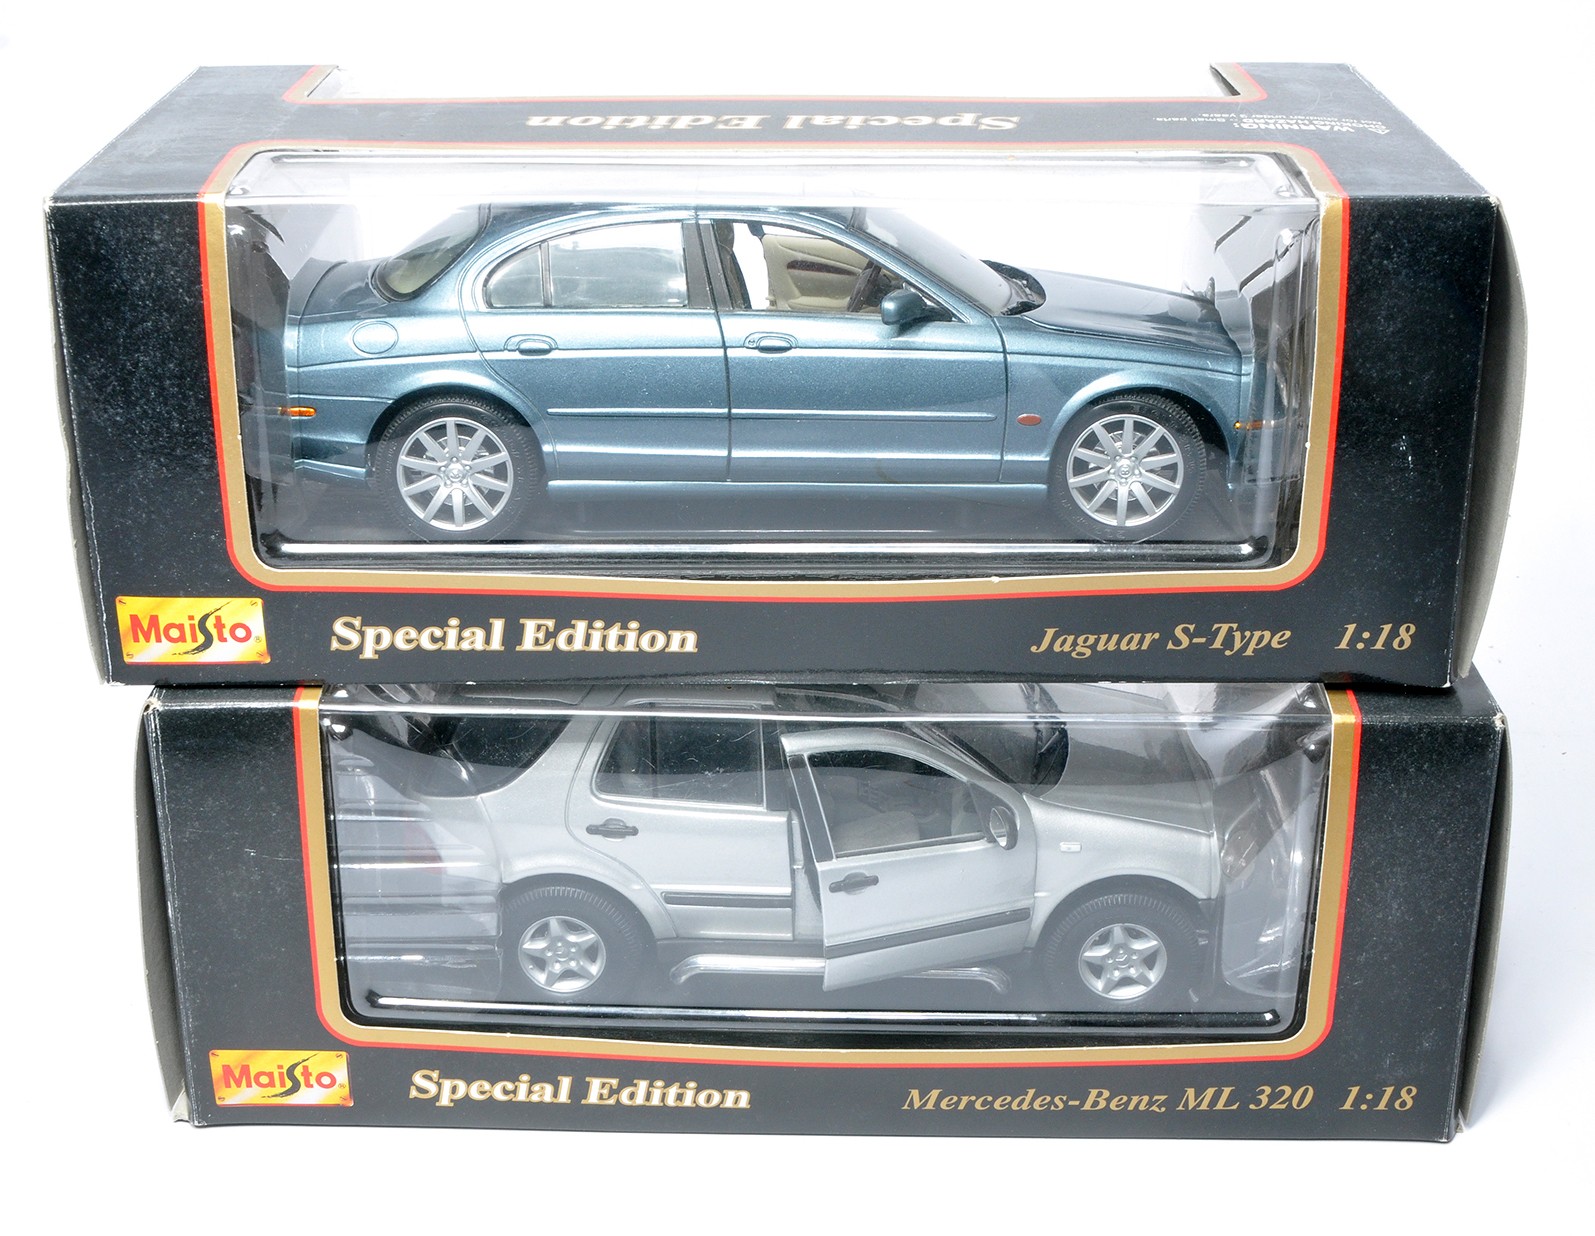 Maisto duo of 1/18 diecast model car issues in original boxes.